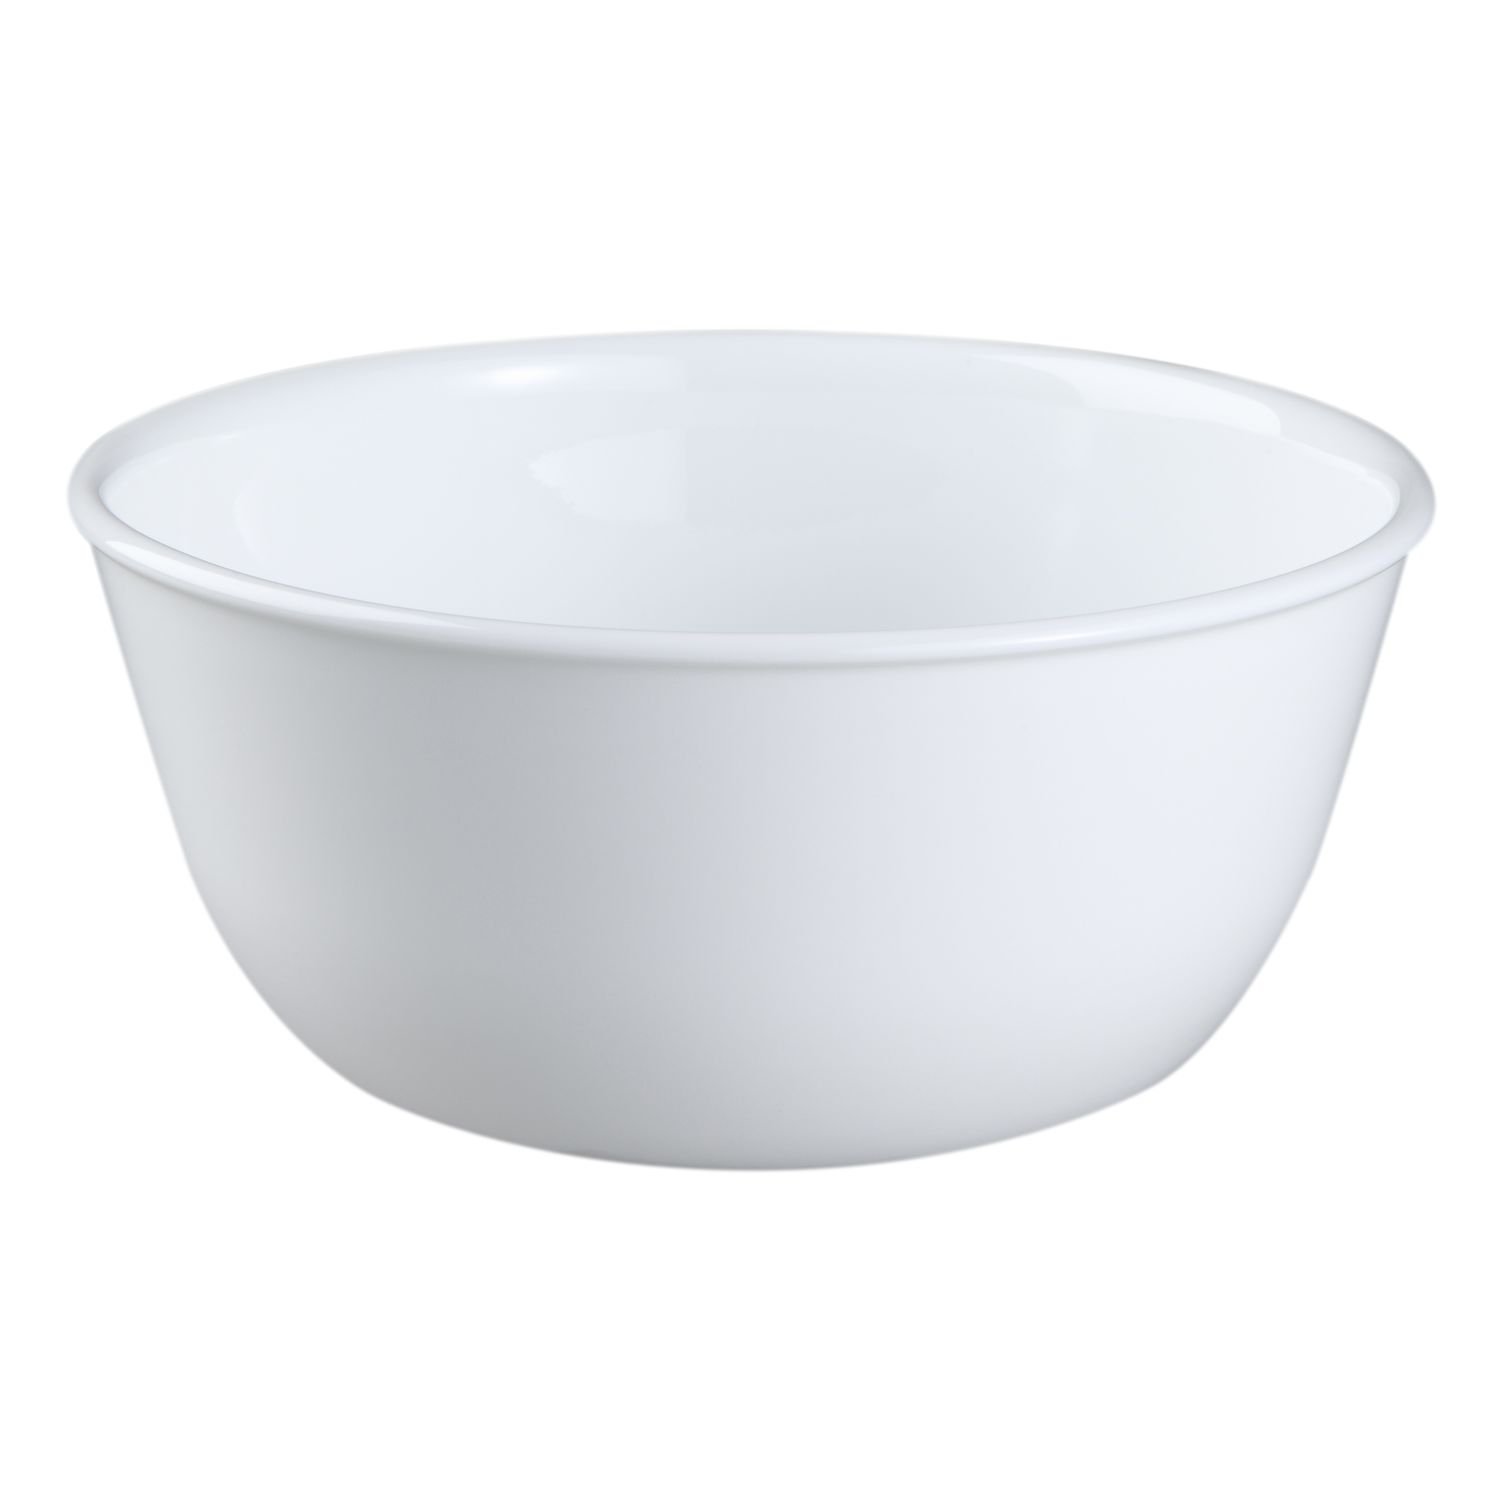 Corelle Coordinates White Livingware Winter Frost 28 Ounce Glass Soup/Cereal Bowl (Set of 4), 4 Count